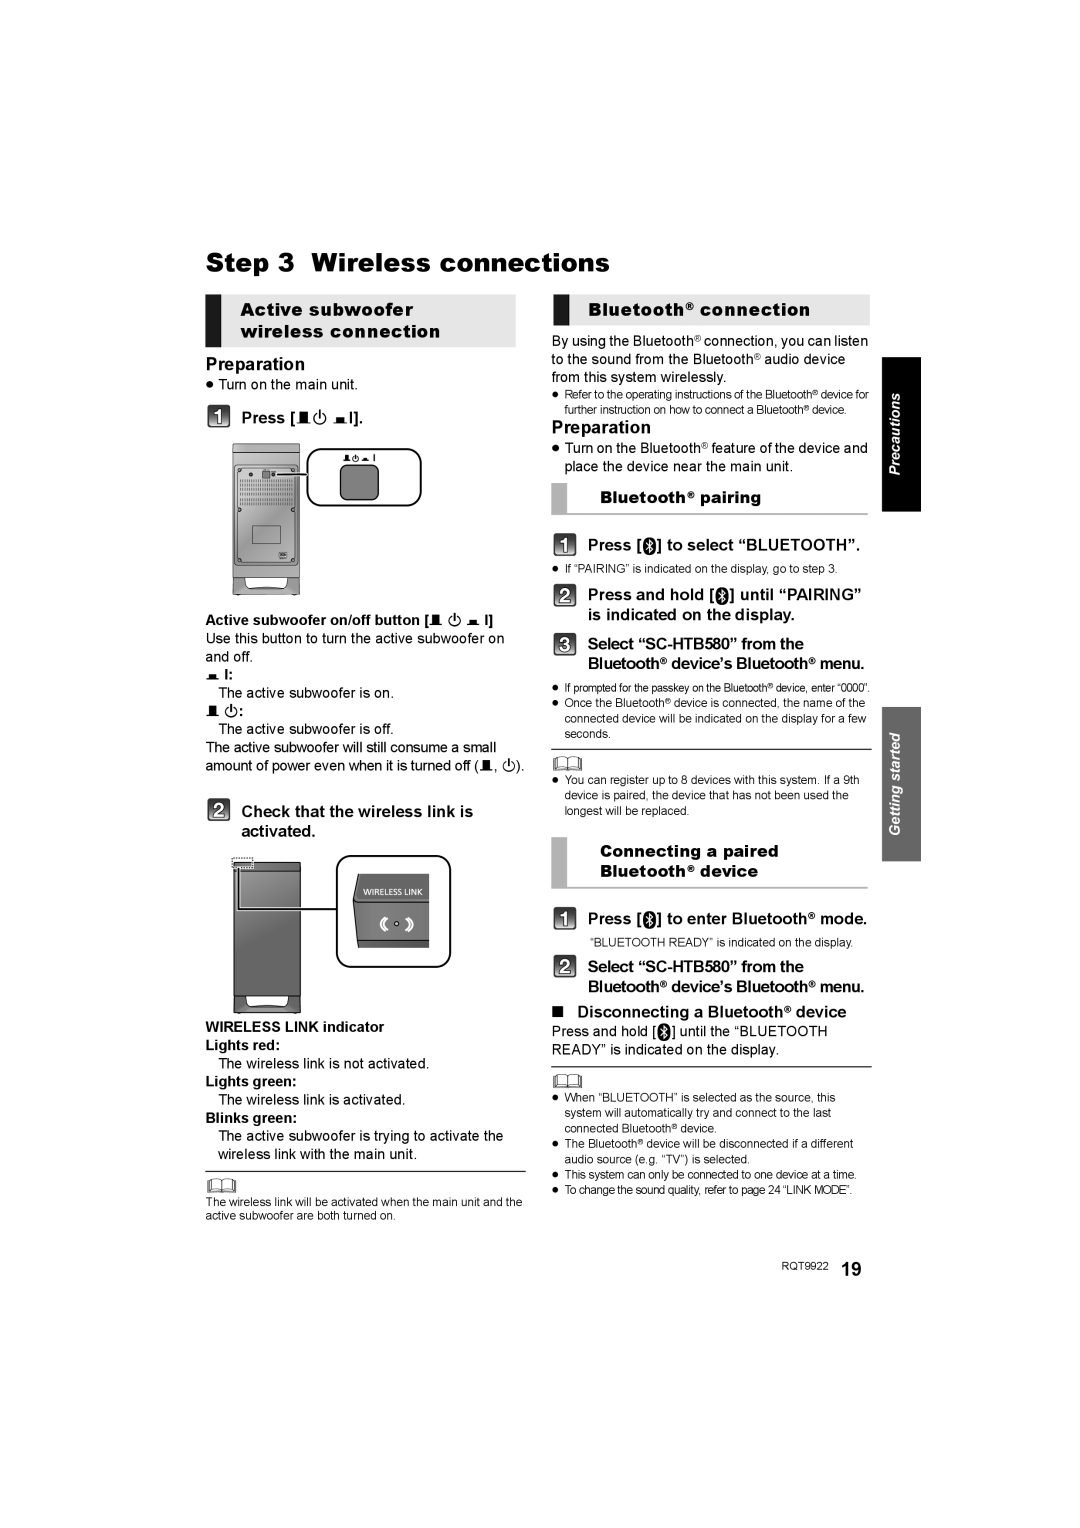 Panasonic SC-HTB580 Wireless connections, Active subwoofer wireless connection Preparation, Bluetooth connection 